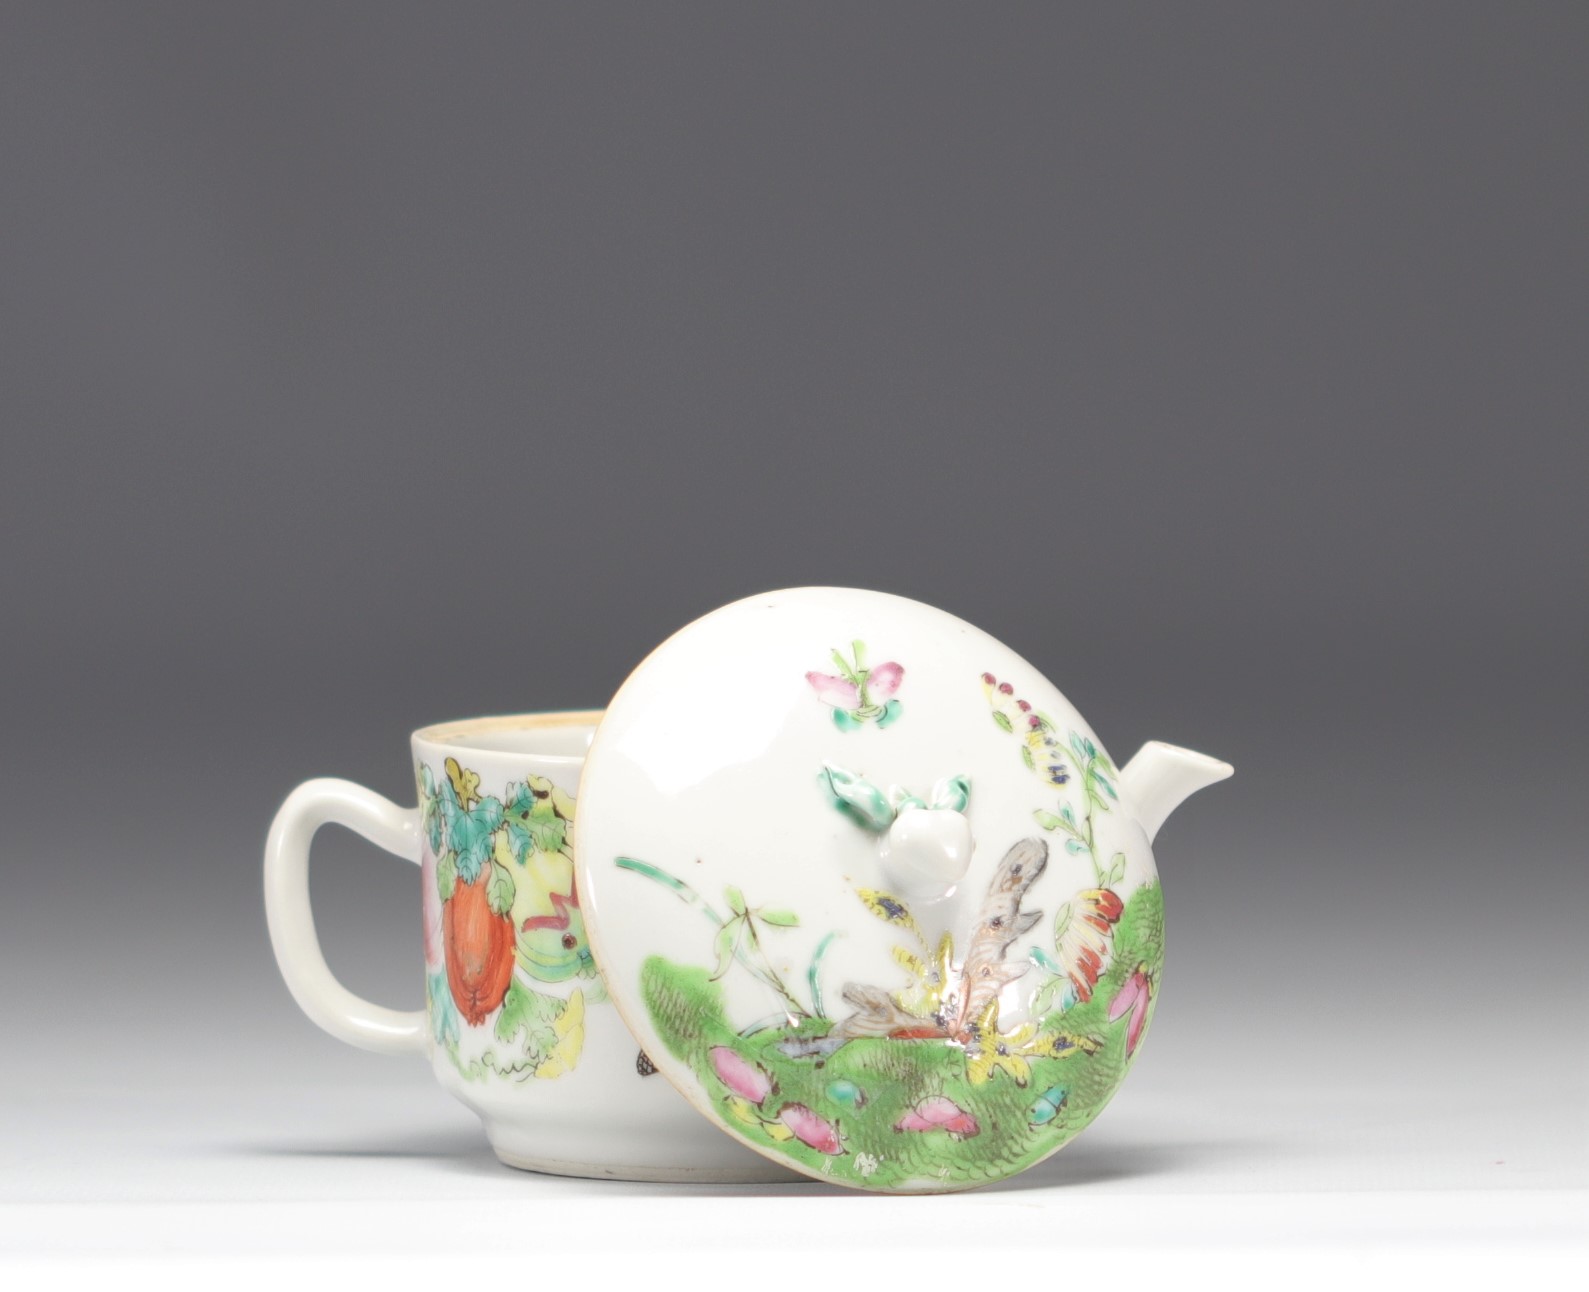 Famille rose porcelain teapot decorated with butterflies and flowers - Image 3 of 4